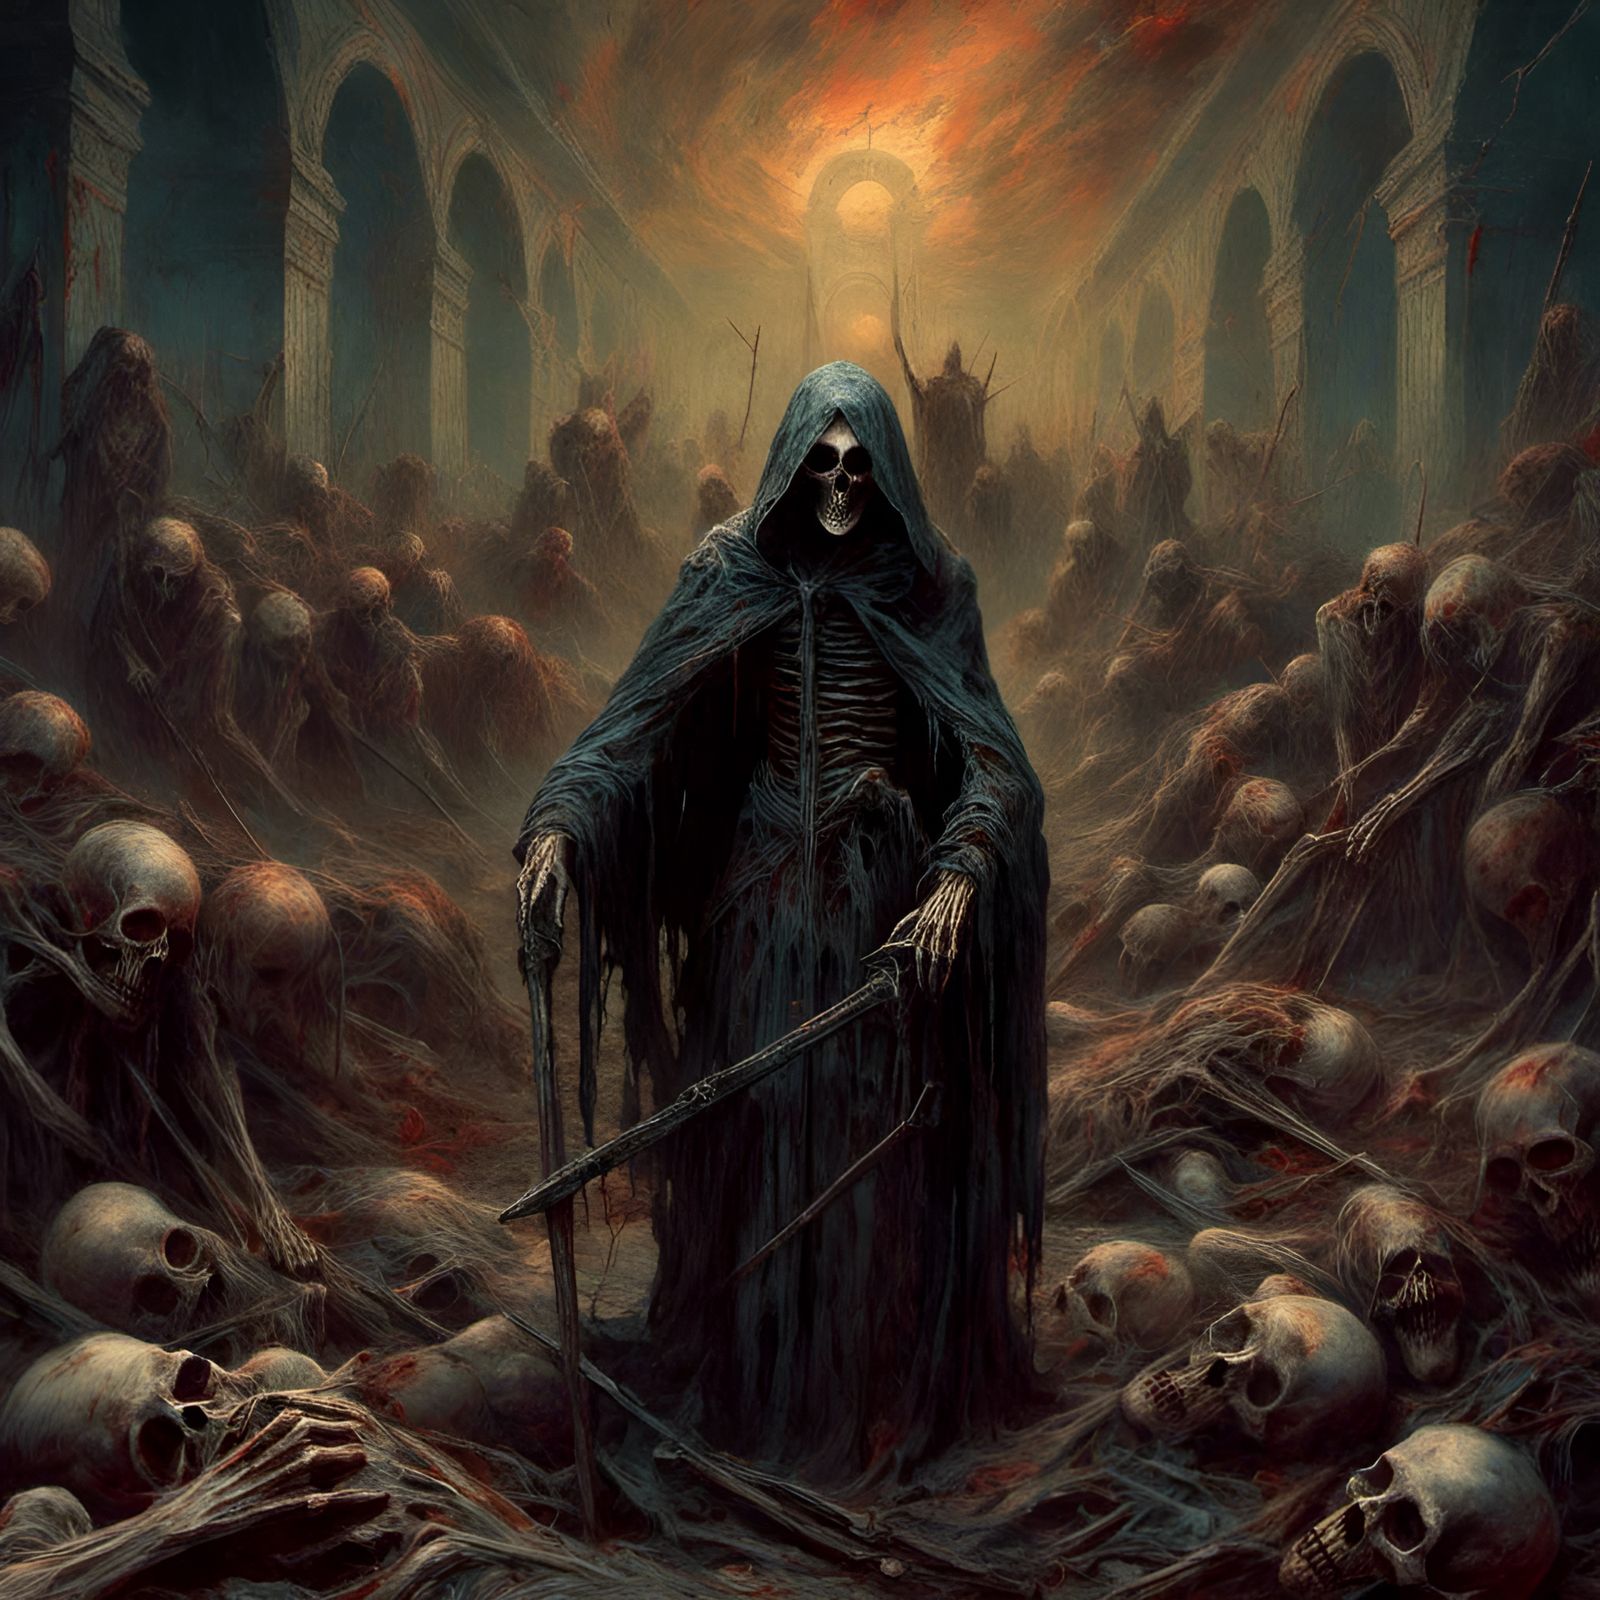 grim reaper of the apocalypse,death,famine,epidemic,war,among the dead ...